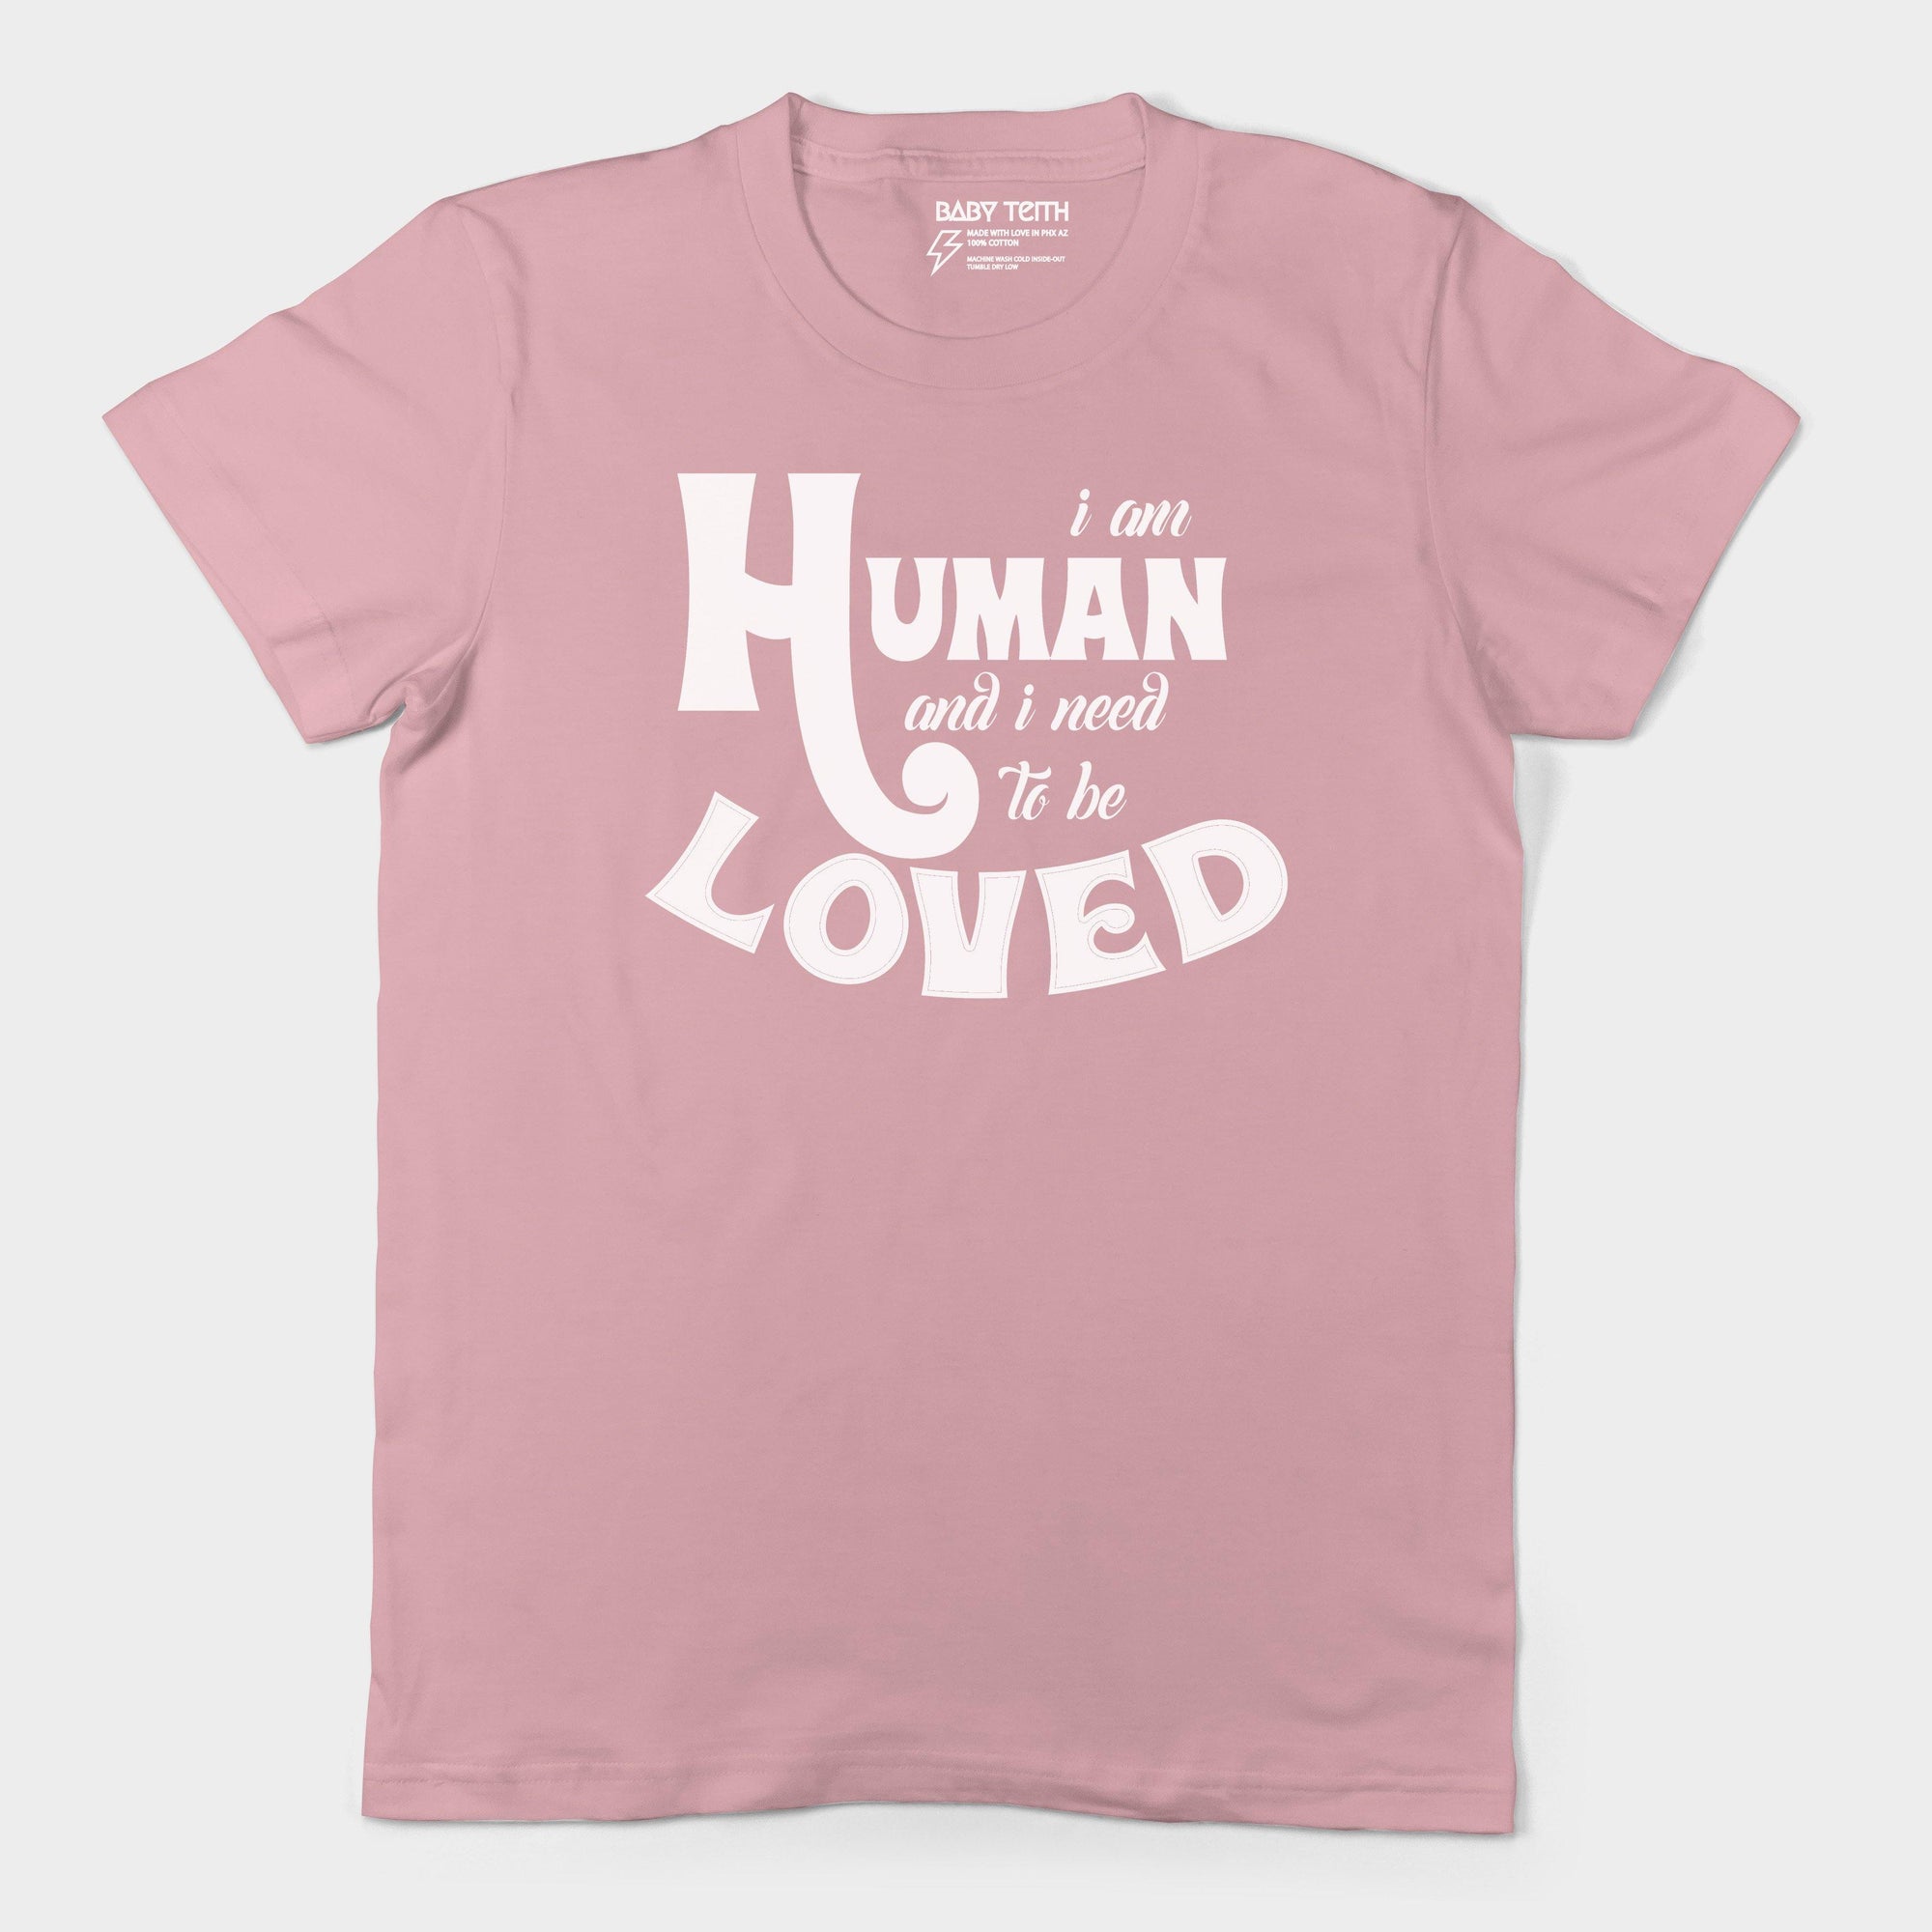 &quot;I am Human&quot; Adult&#39;s Unisex Tee (5 Colors) - Baby Teith